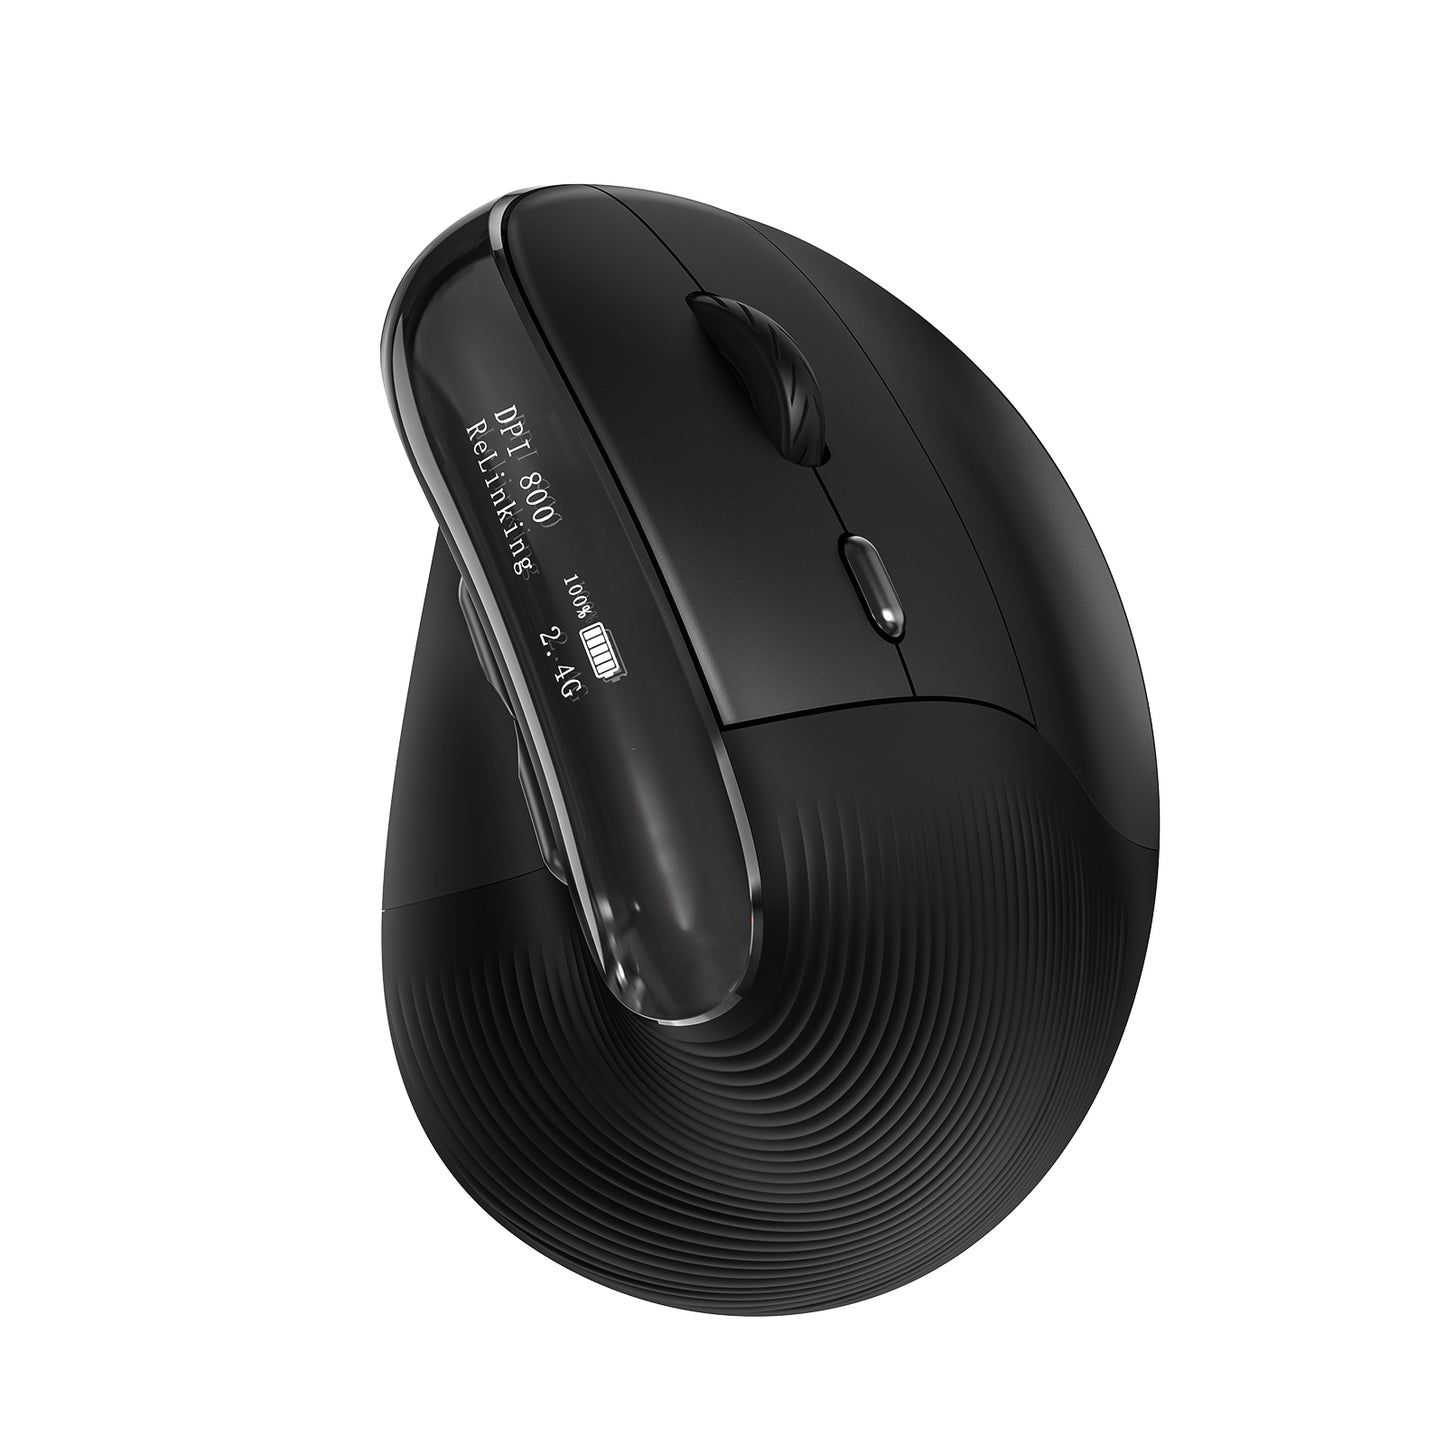 Wireless Ergonomic Mouse with OLED Screen